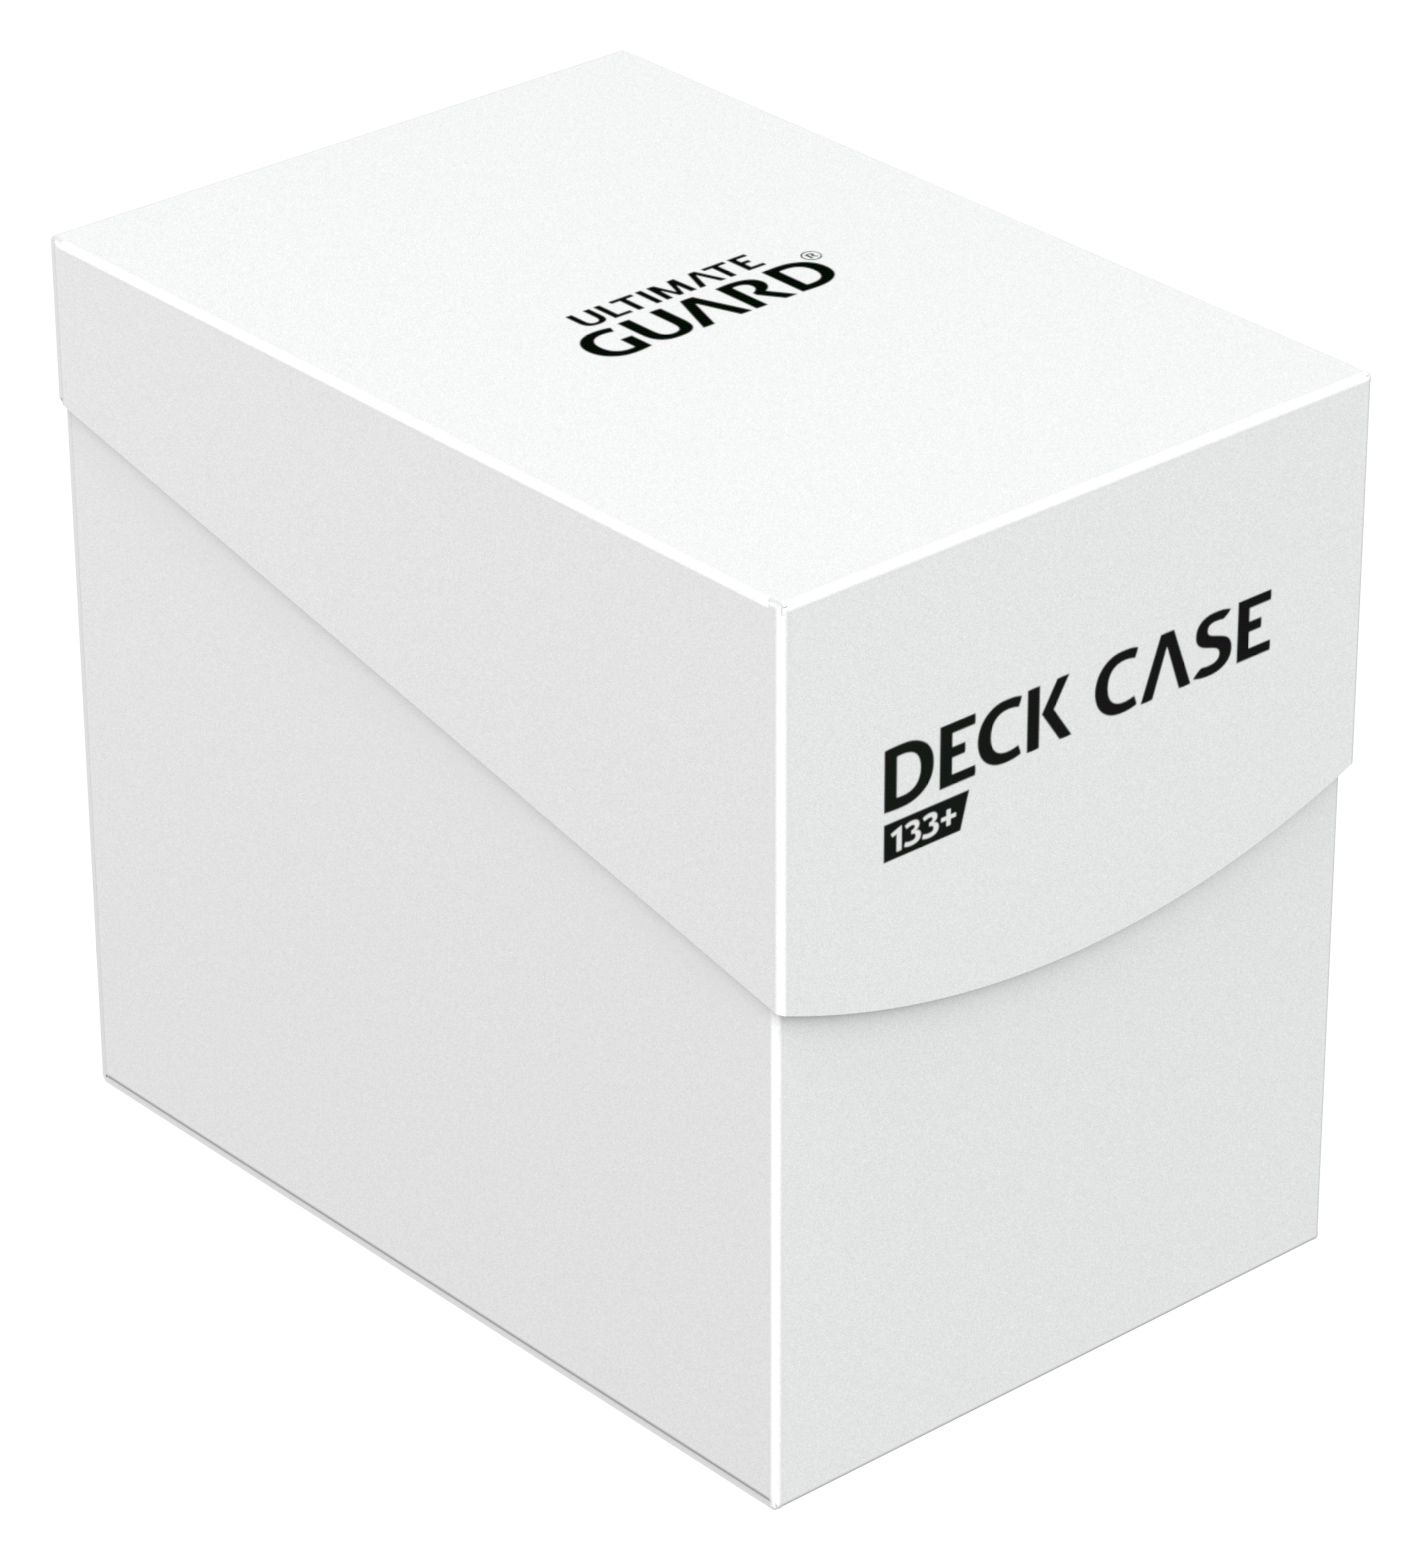 Ultimate Guard Card Deck Box Deck Case 133+ White Weiss